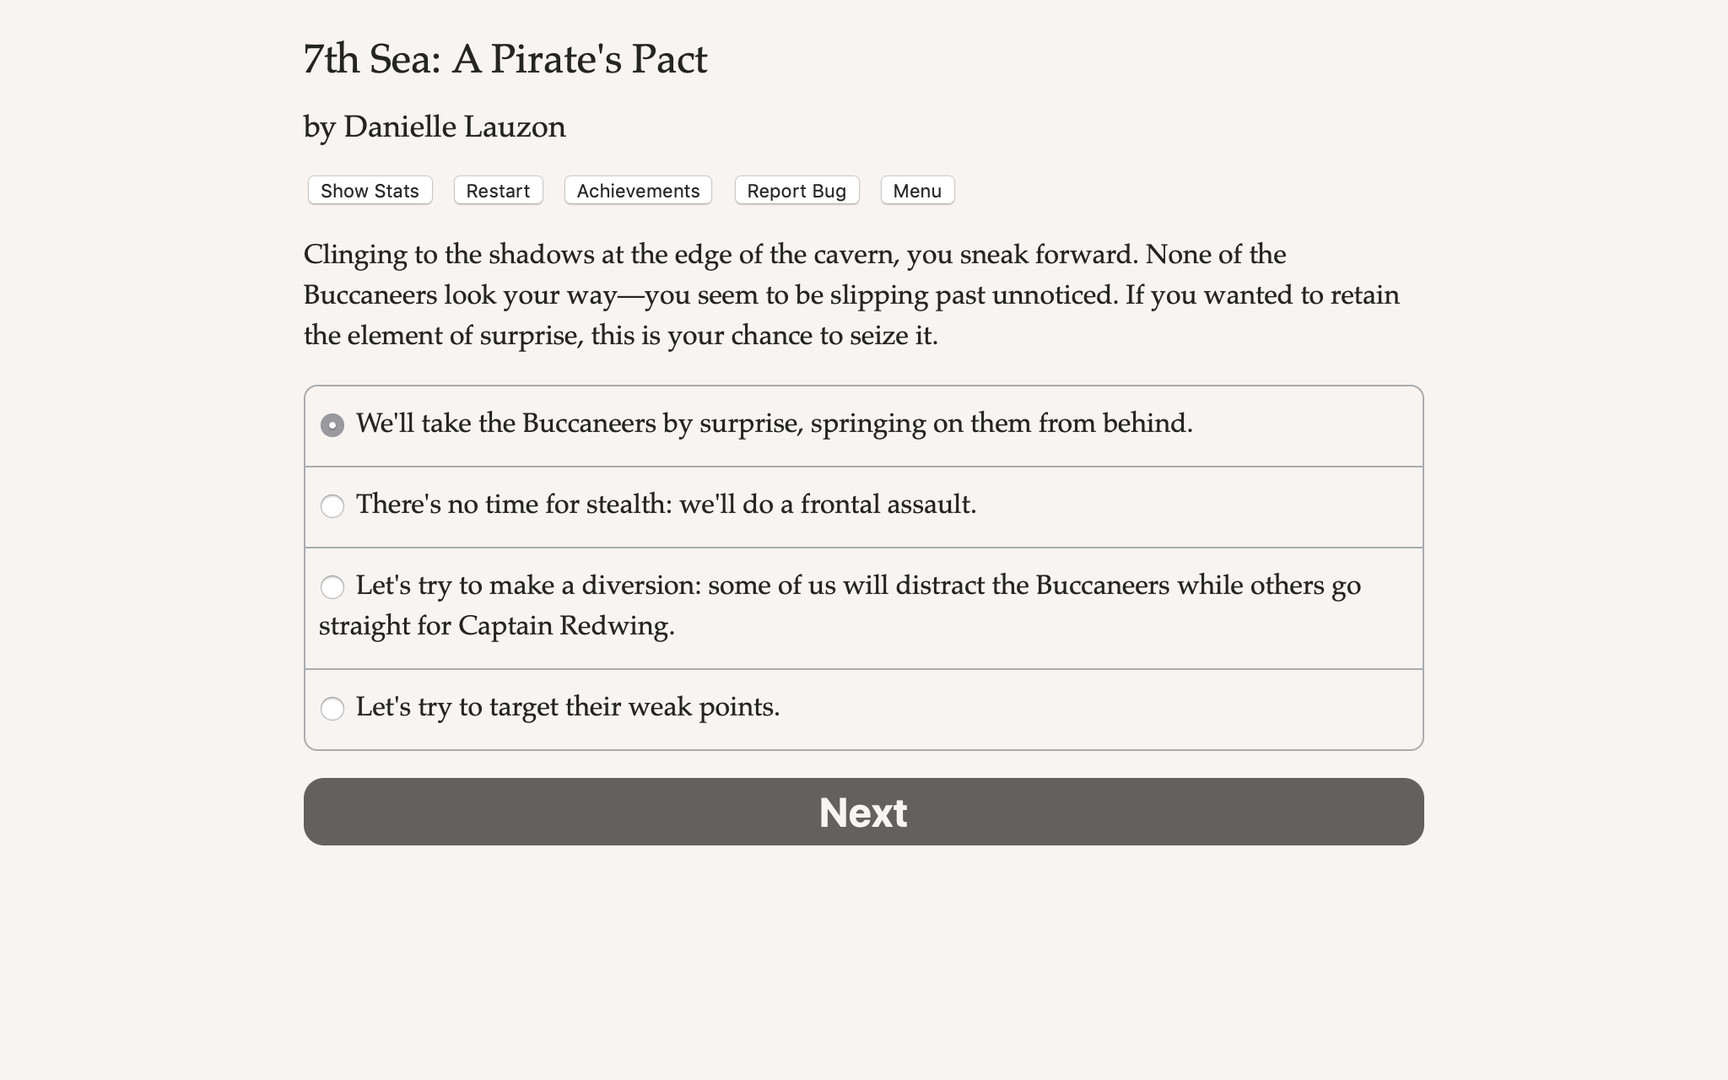 7th Sea: A Pirate's Pact Free Download